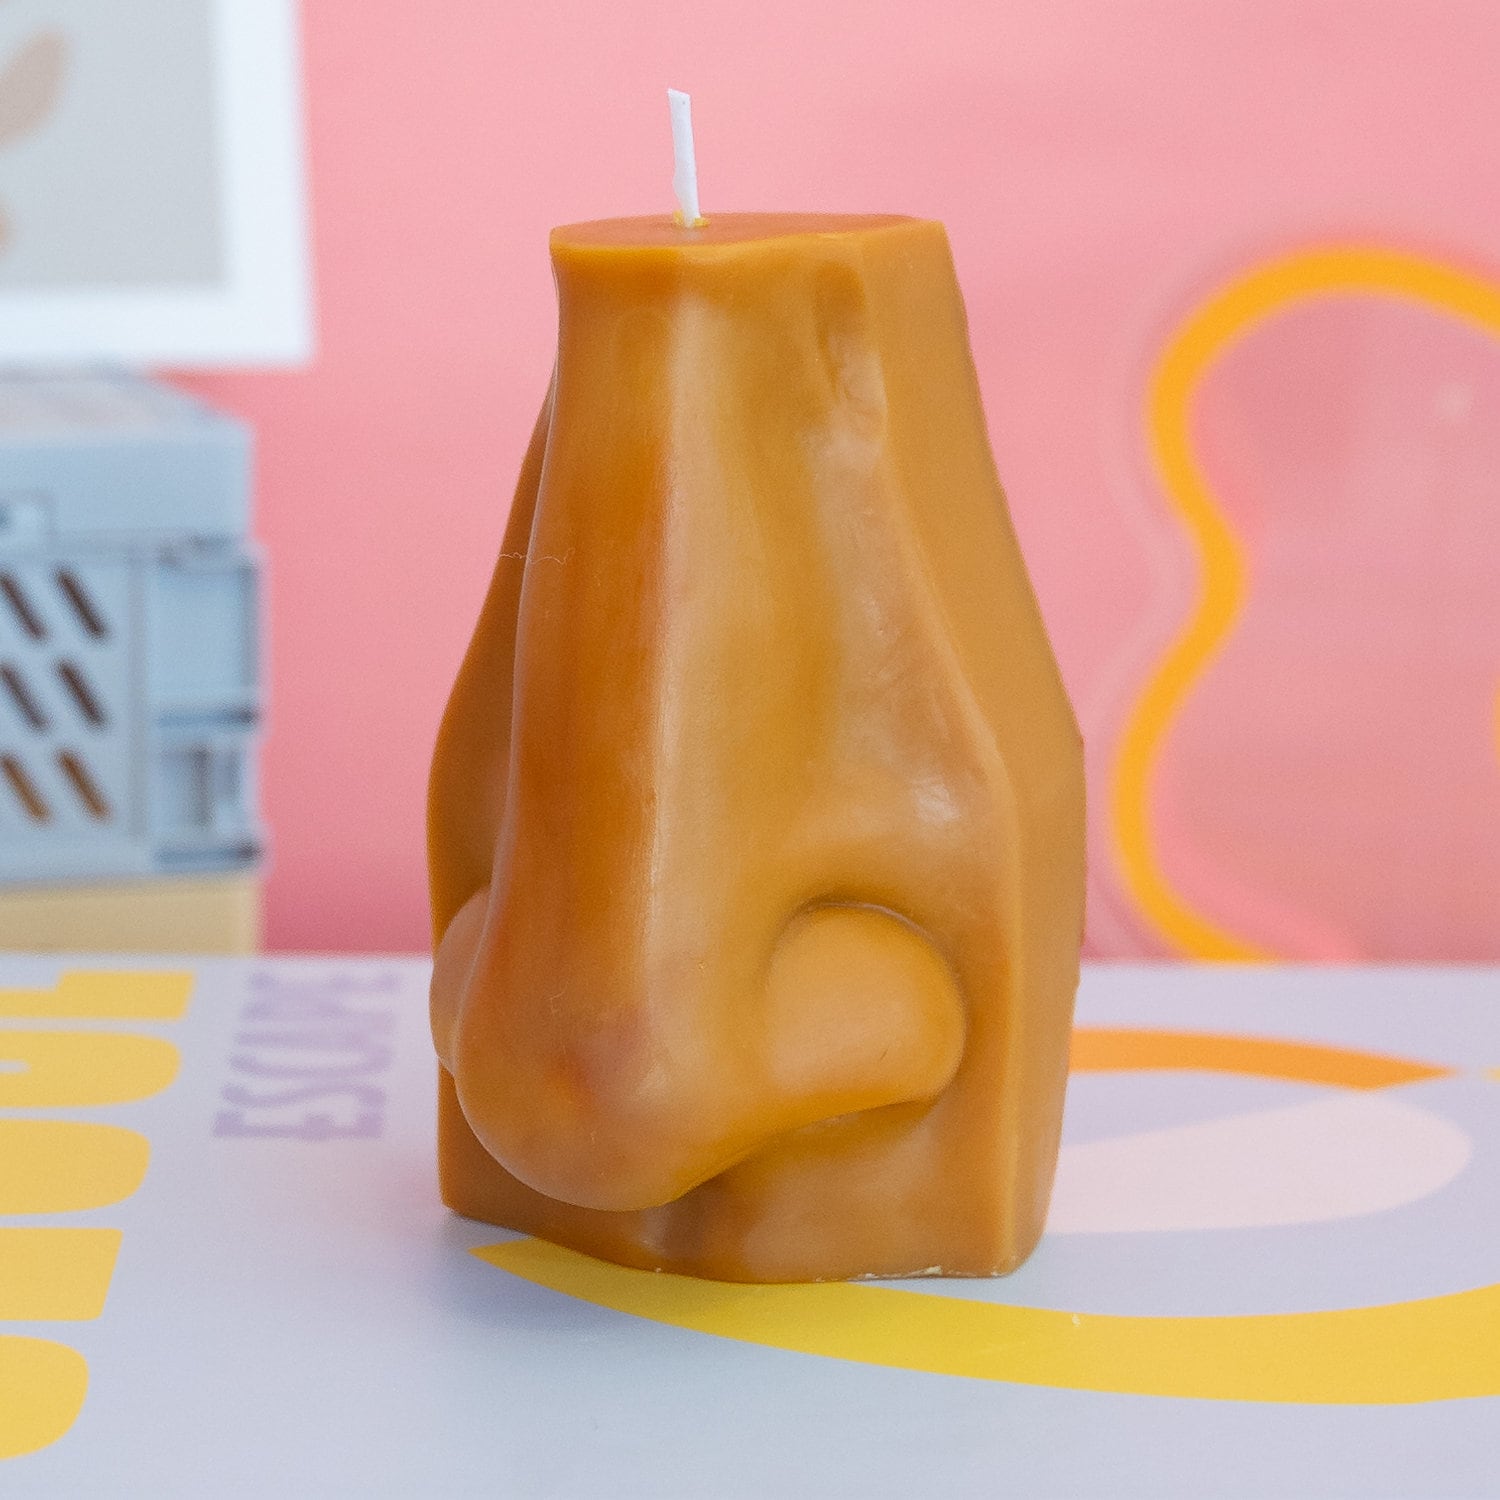 Nose Candle / Face Candle / Funny Candle / Abstract Candle / Home Decor / Unique Candle / Nice Candle